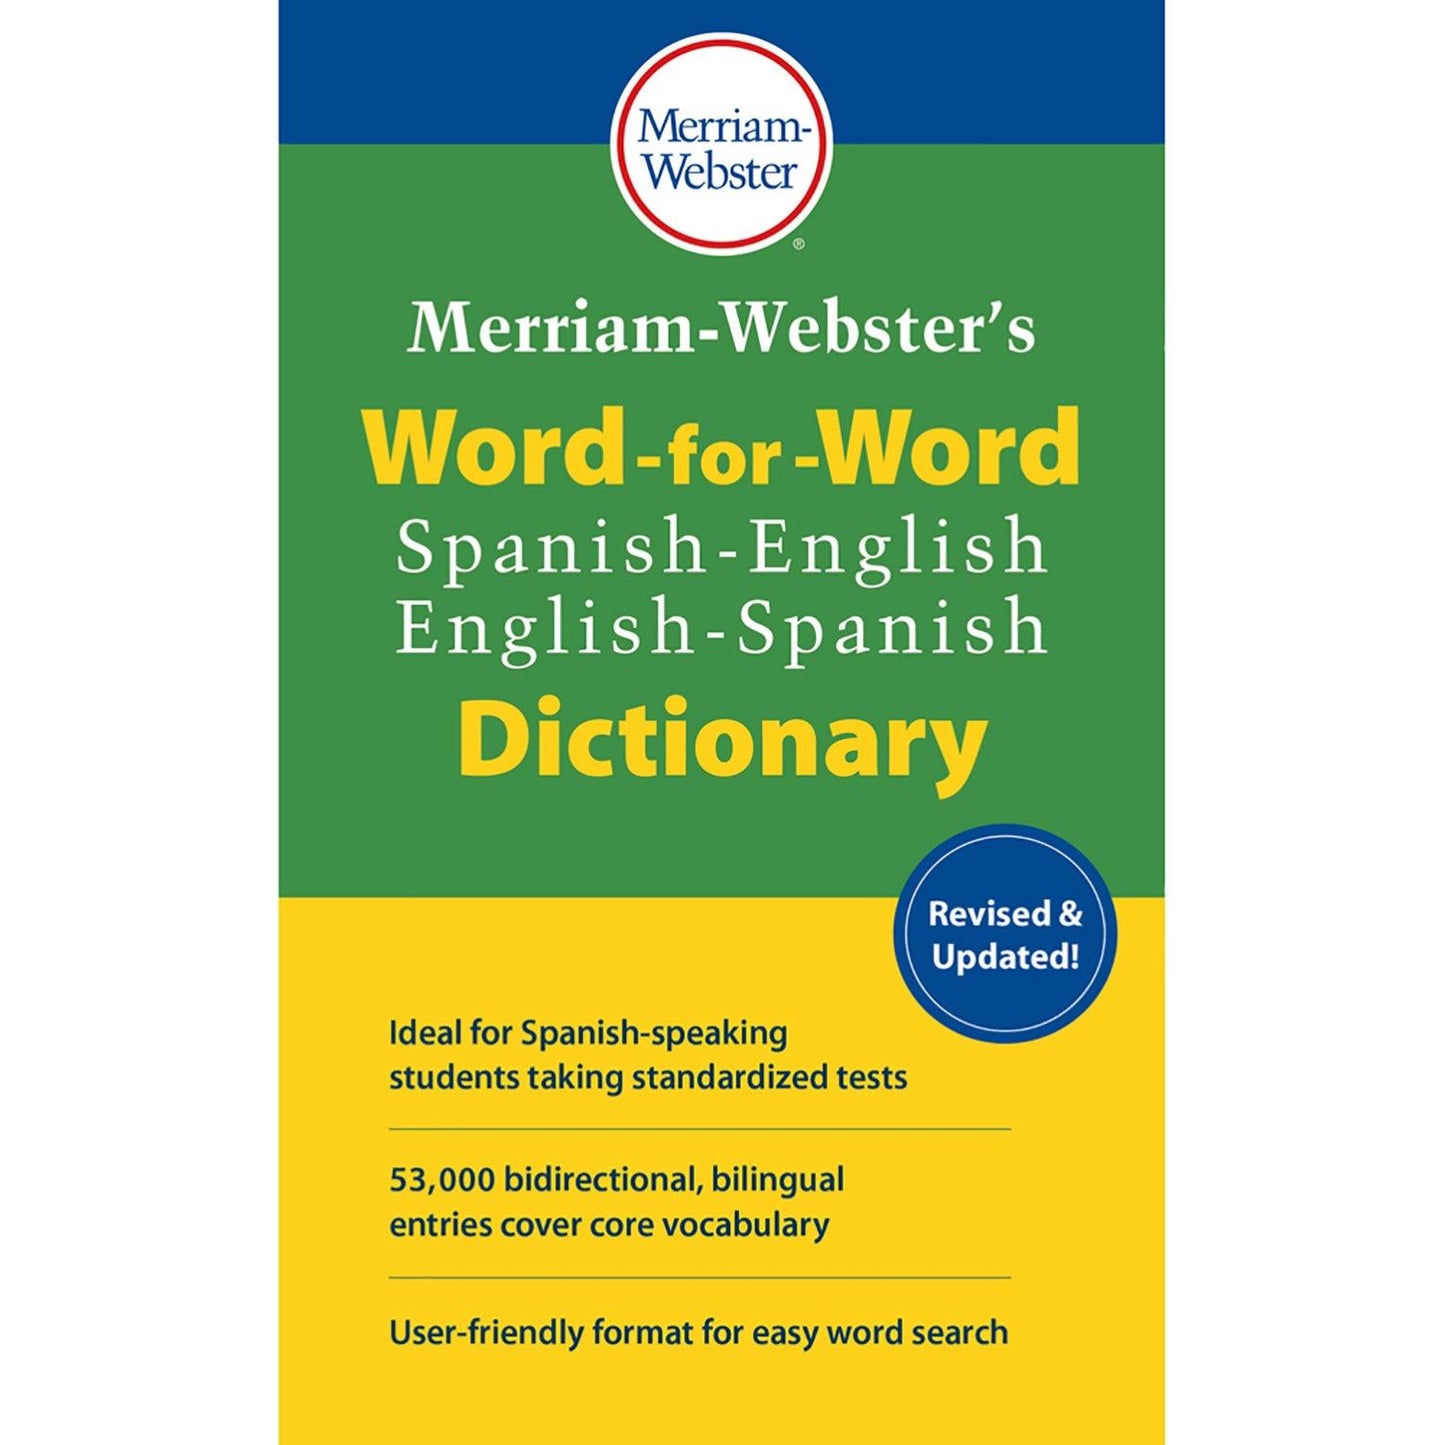 Merriam-Webster's Word-for-Word Spanish-English Dictionary, Pack of 3 - Loomini